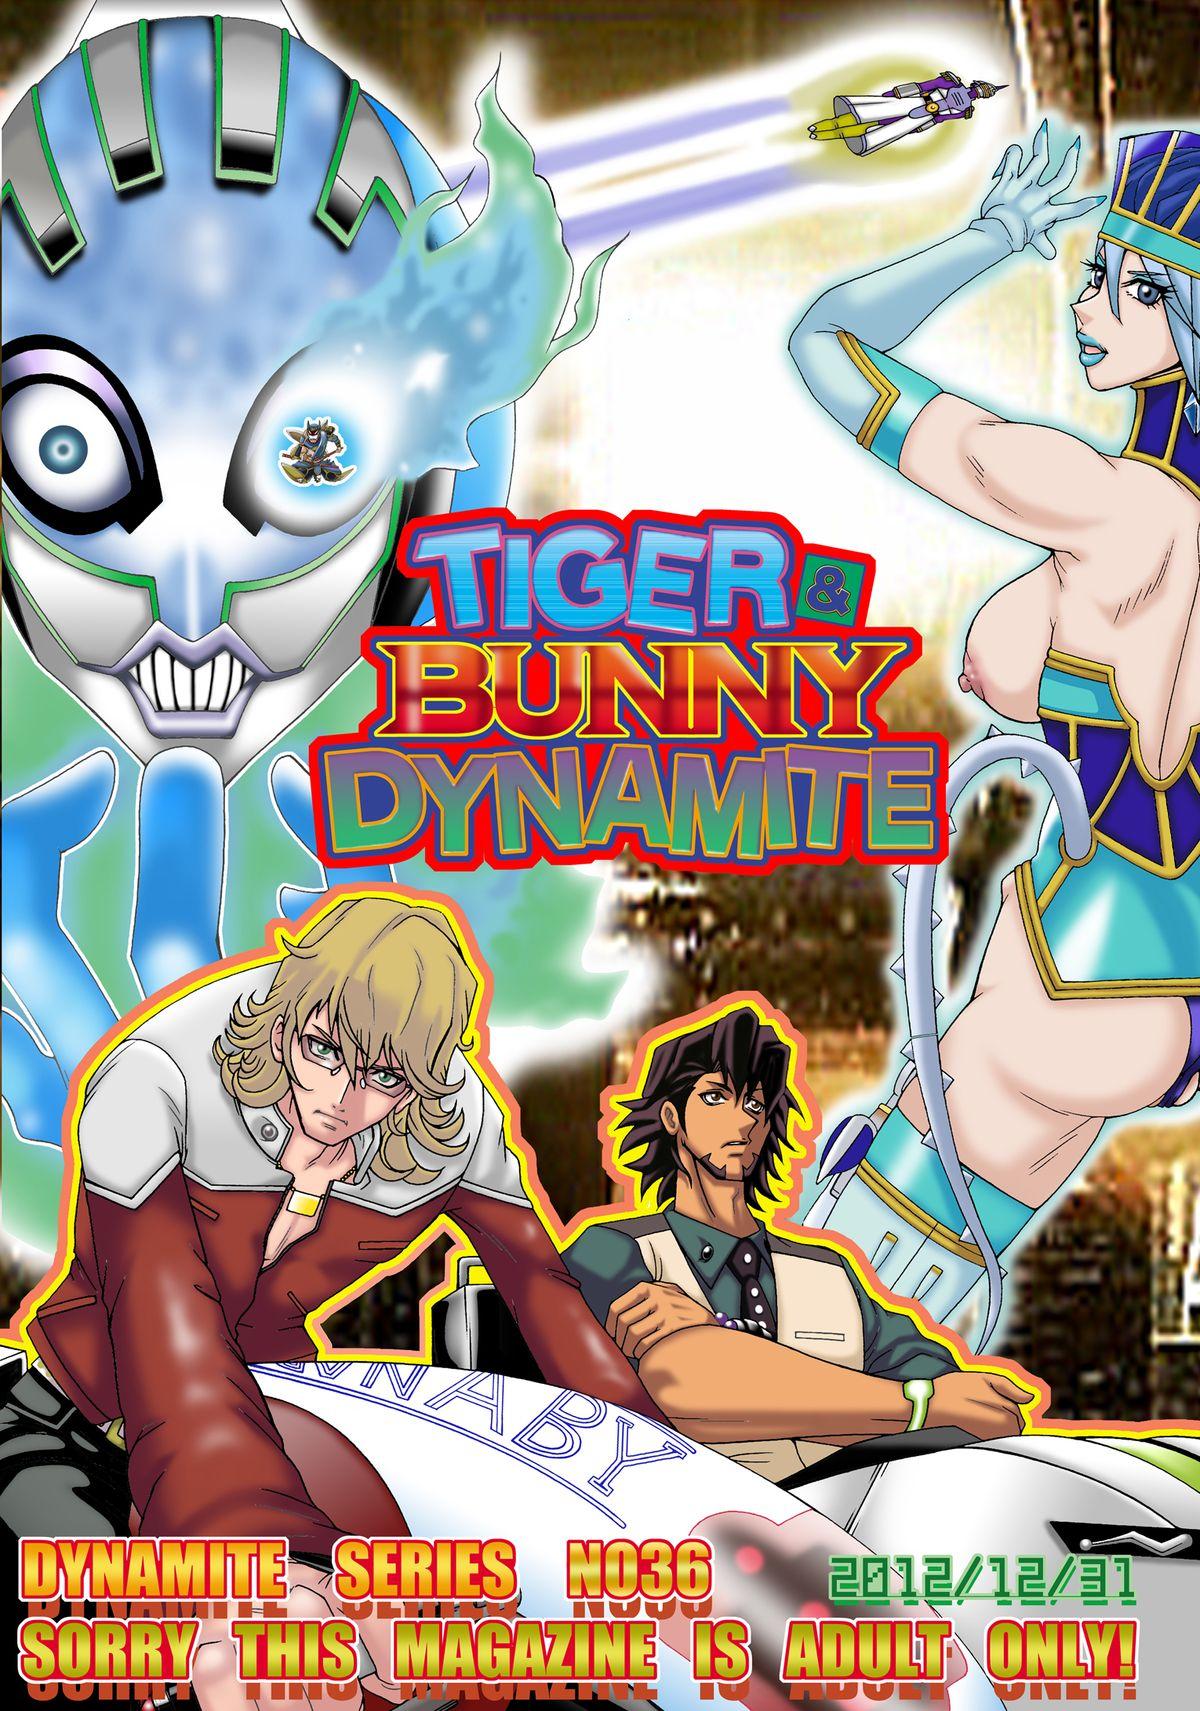 Titties Tiger & Bunny Dynamite - Tiger and bunny Huge Tits - Picture 1